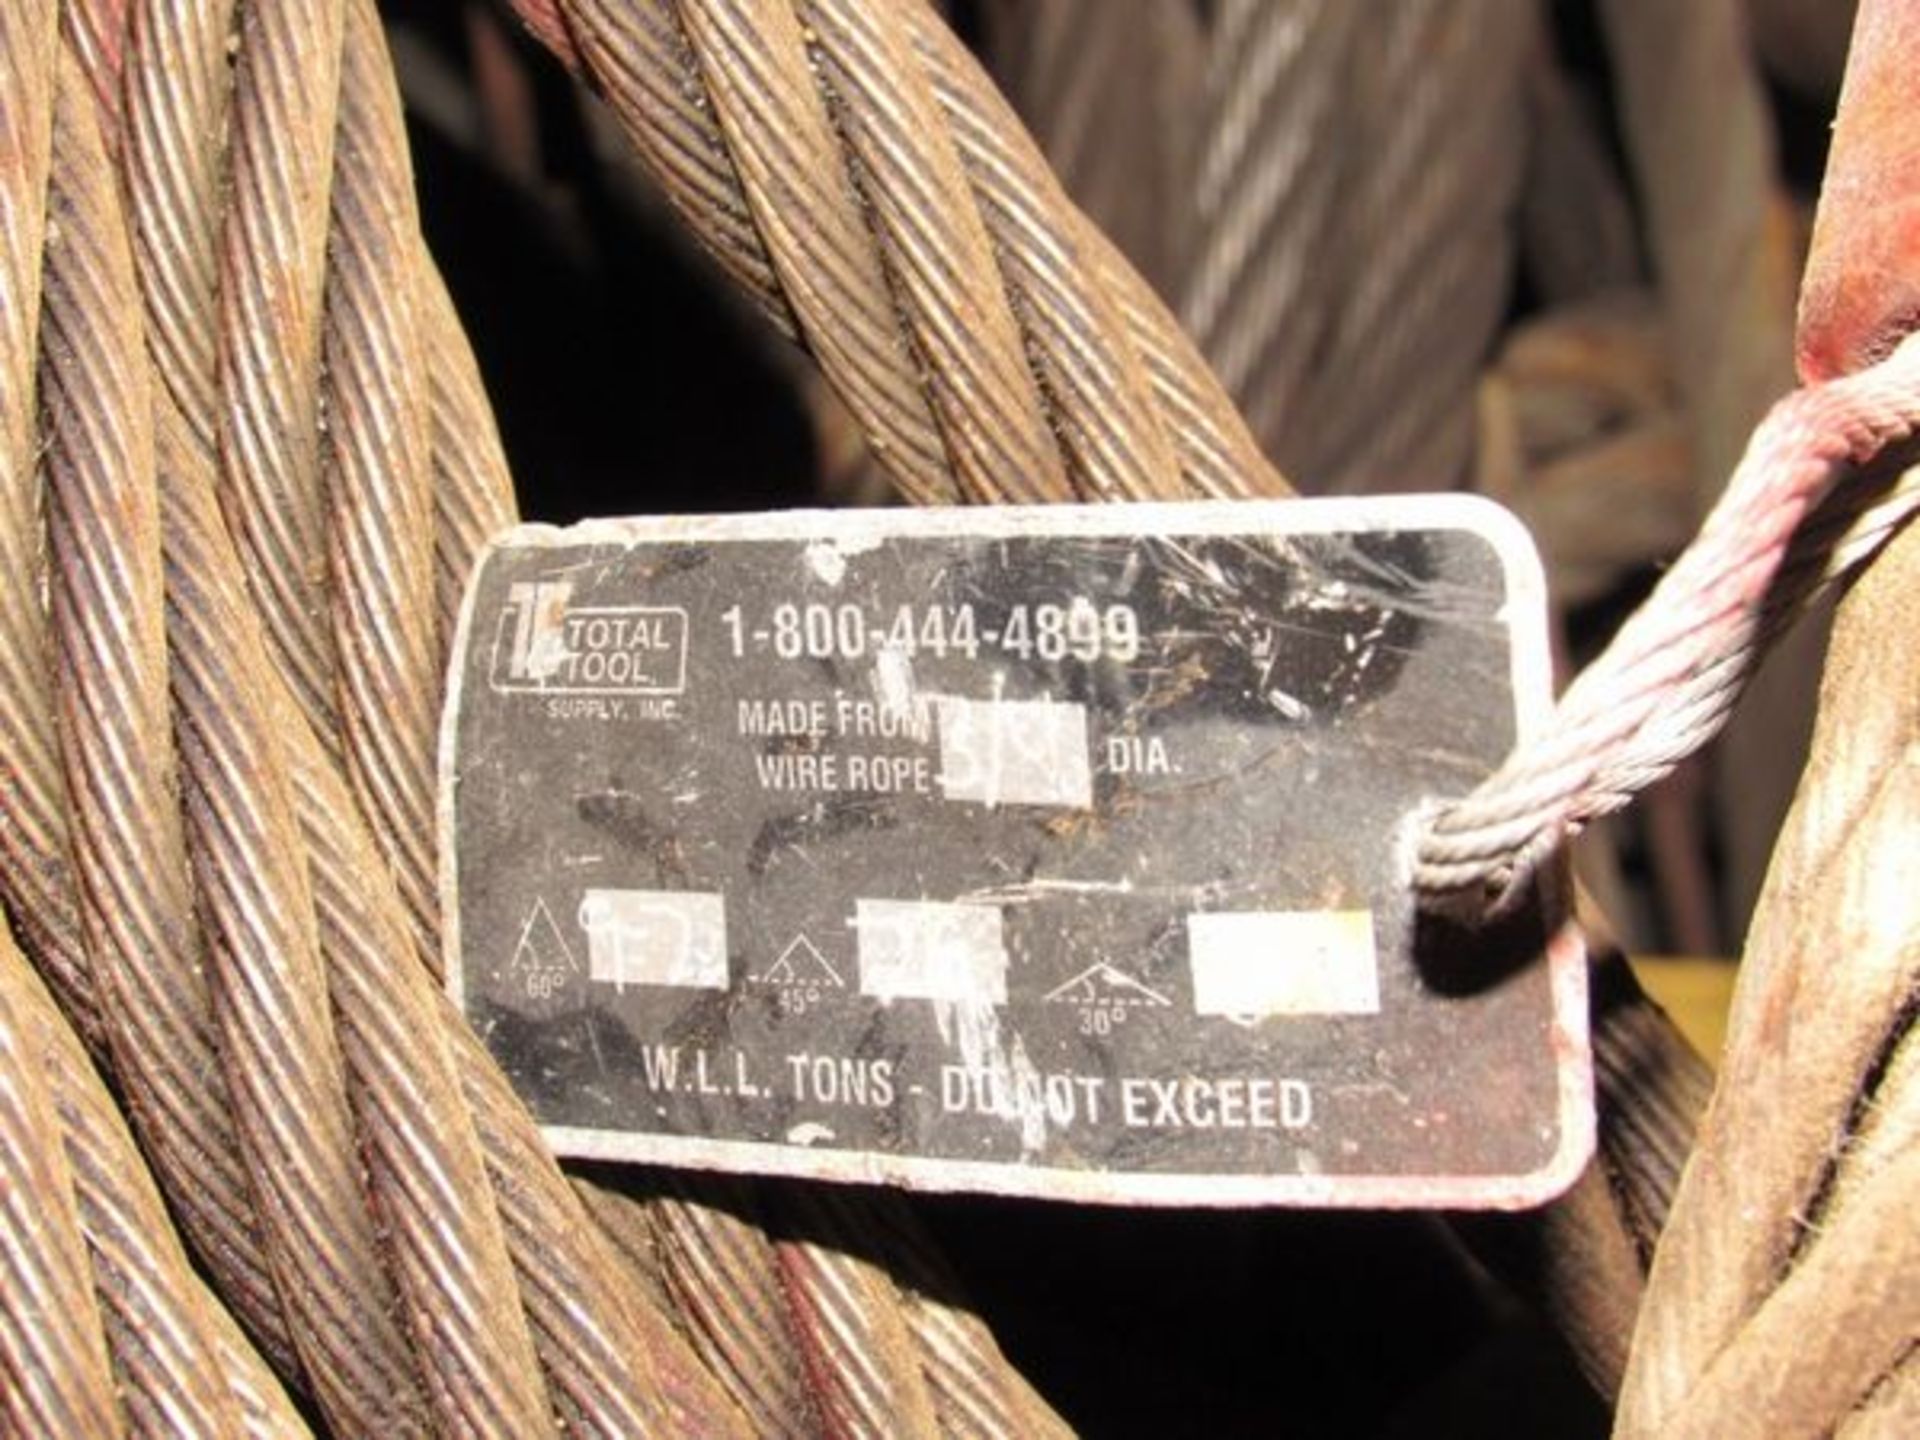 Assorted Braided Steel Lifting Slings- MFR - Dakota Riggers, Total Tool Sizes Range From 1/2" to 3/ - Image 8 of 8